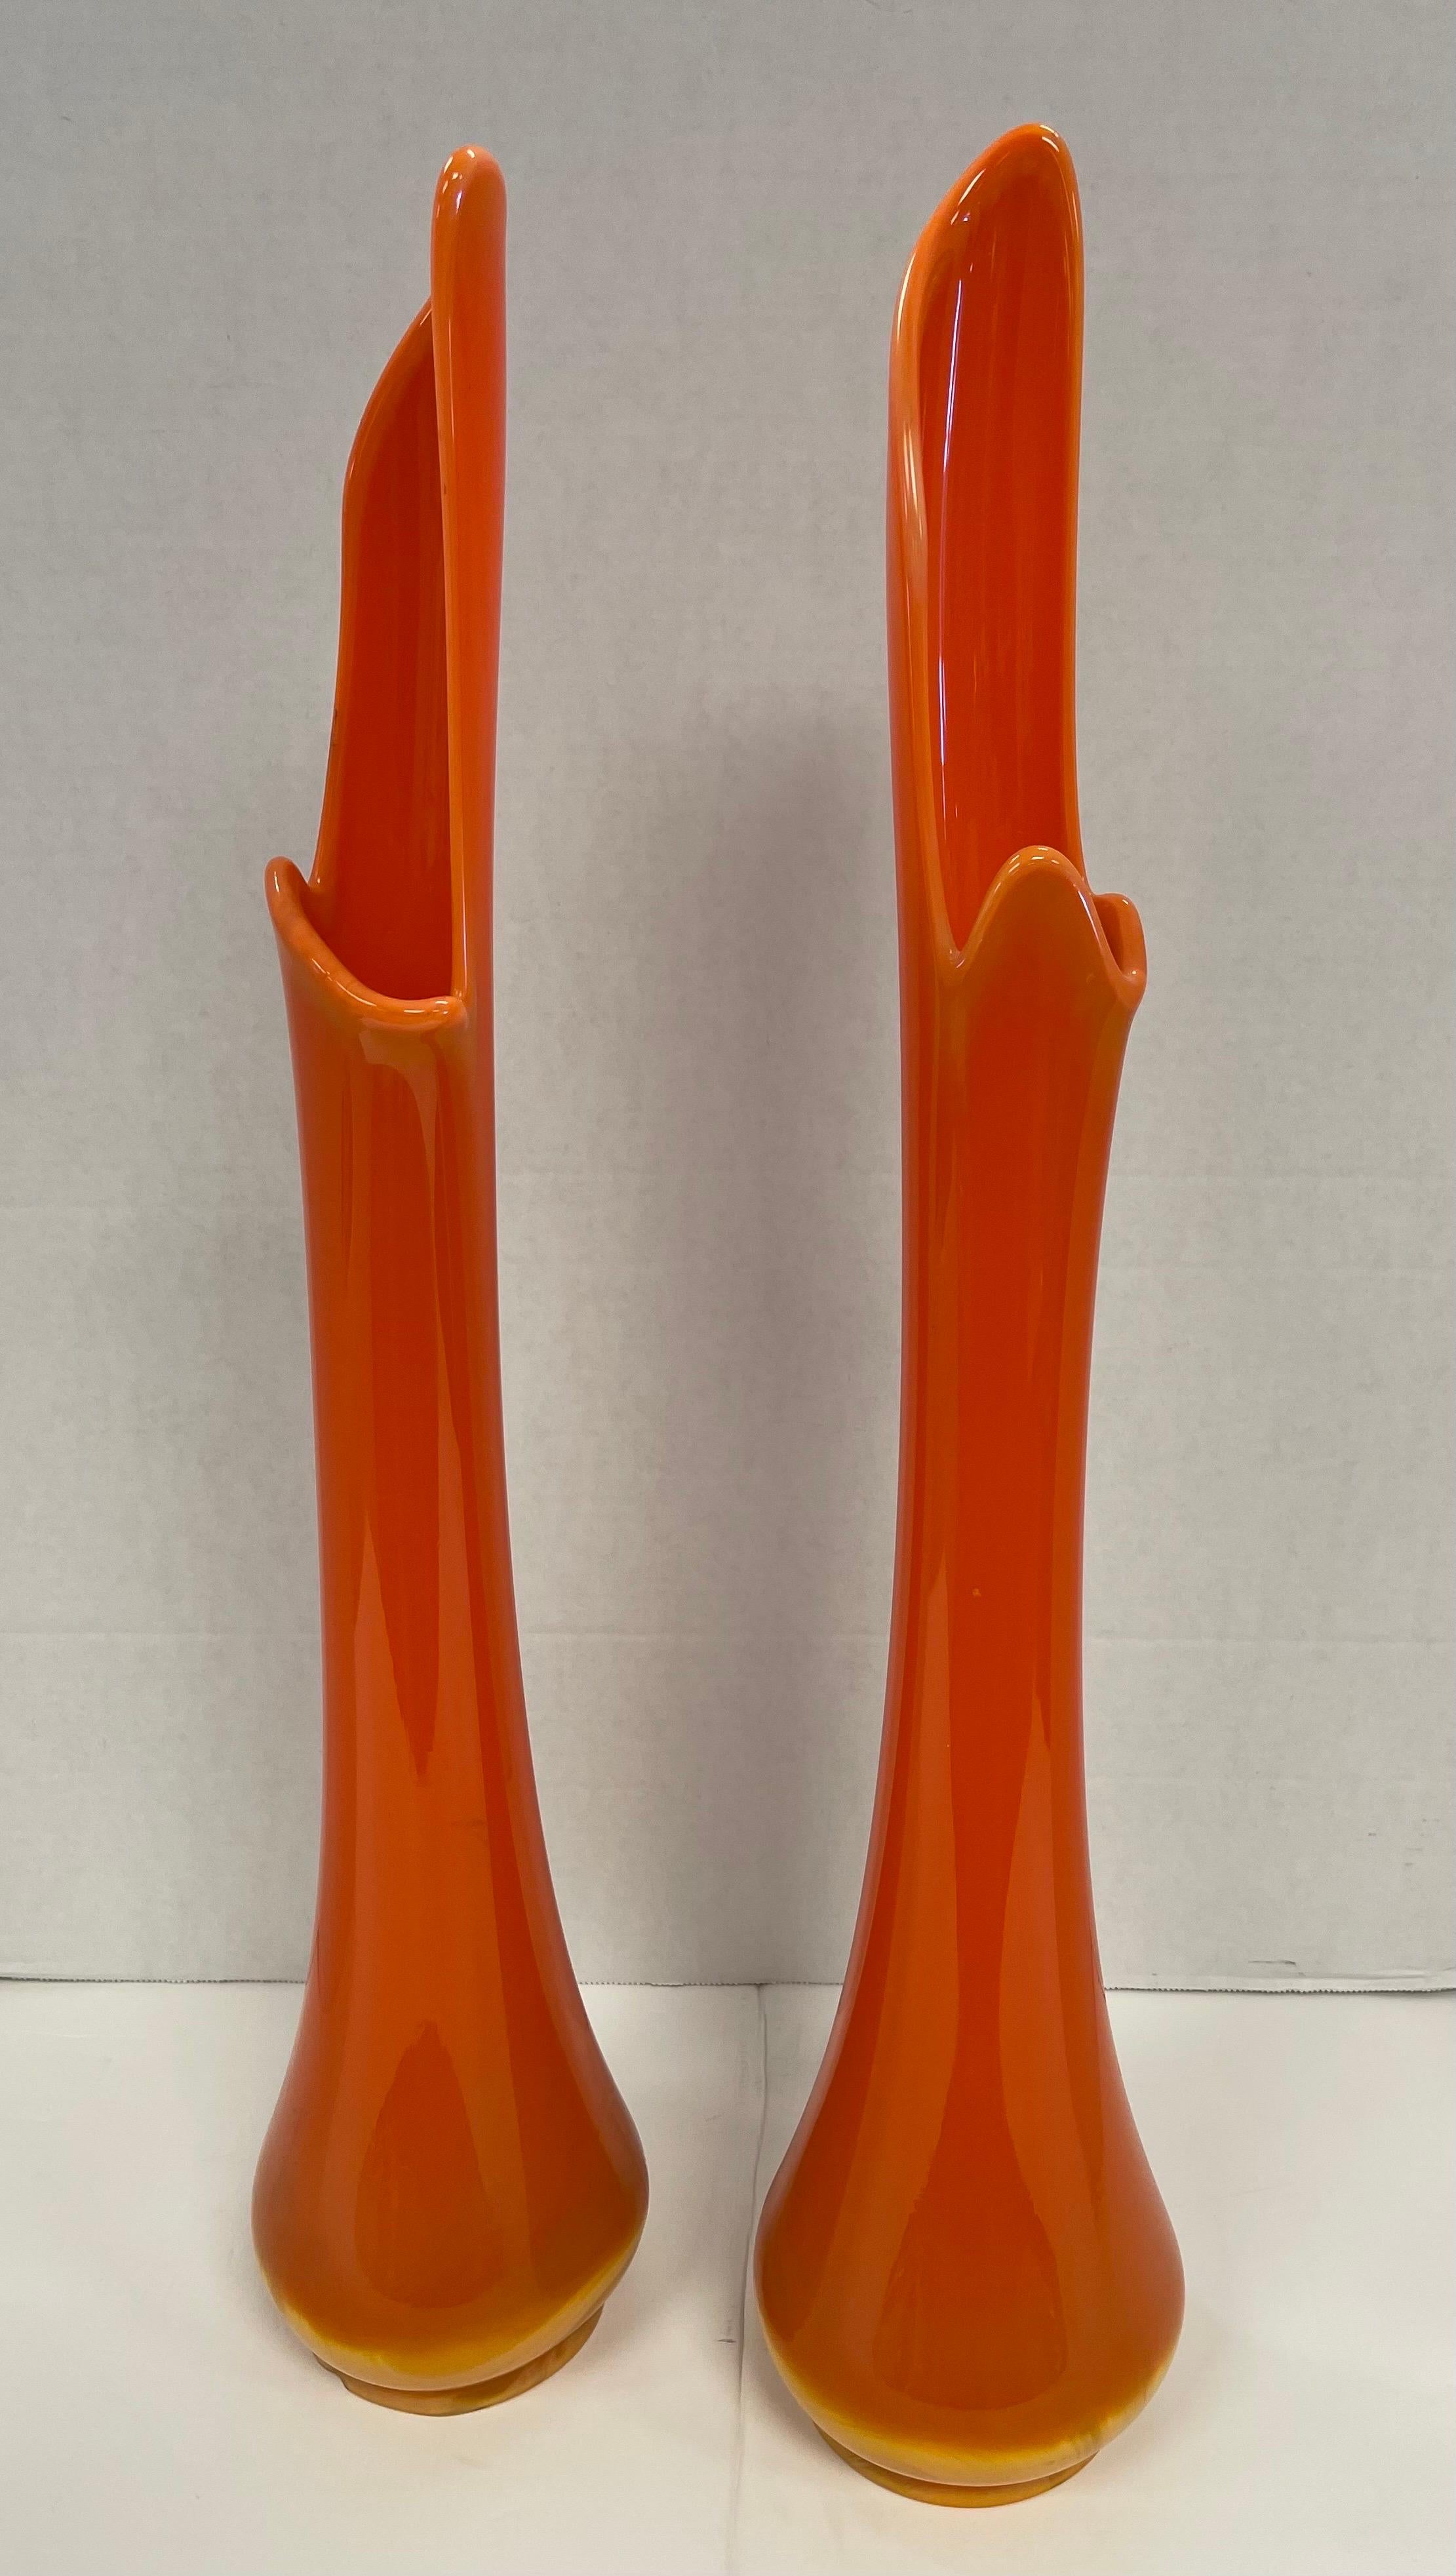 Magnificent matching pair of Hermes orange colored swung slag glass vases. No hallmarks at bottom. Measurements are below and note one is .5 inches shorter than the other. Vibrant orange color down to the bottom where it becomes lighter orange only